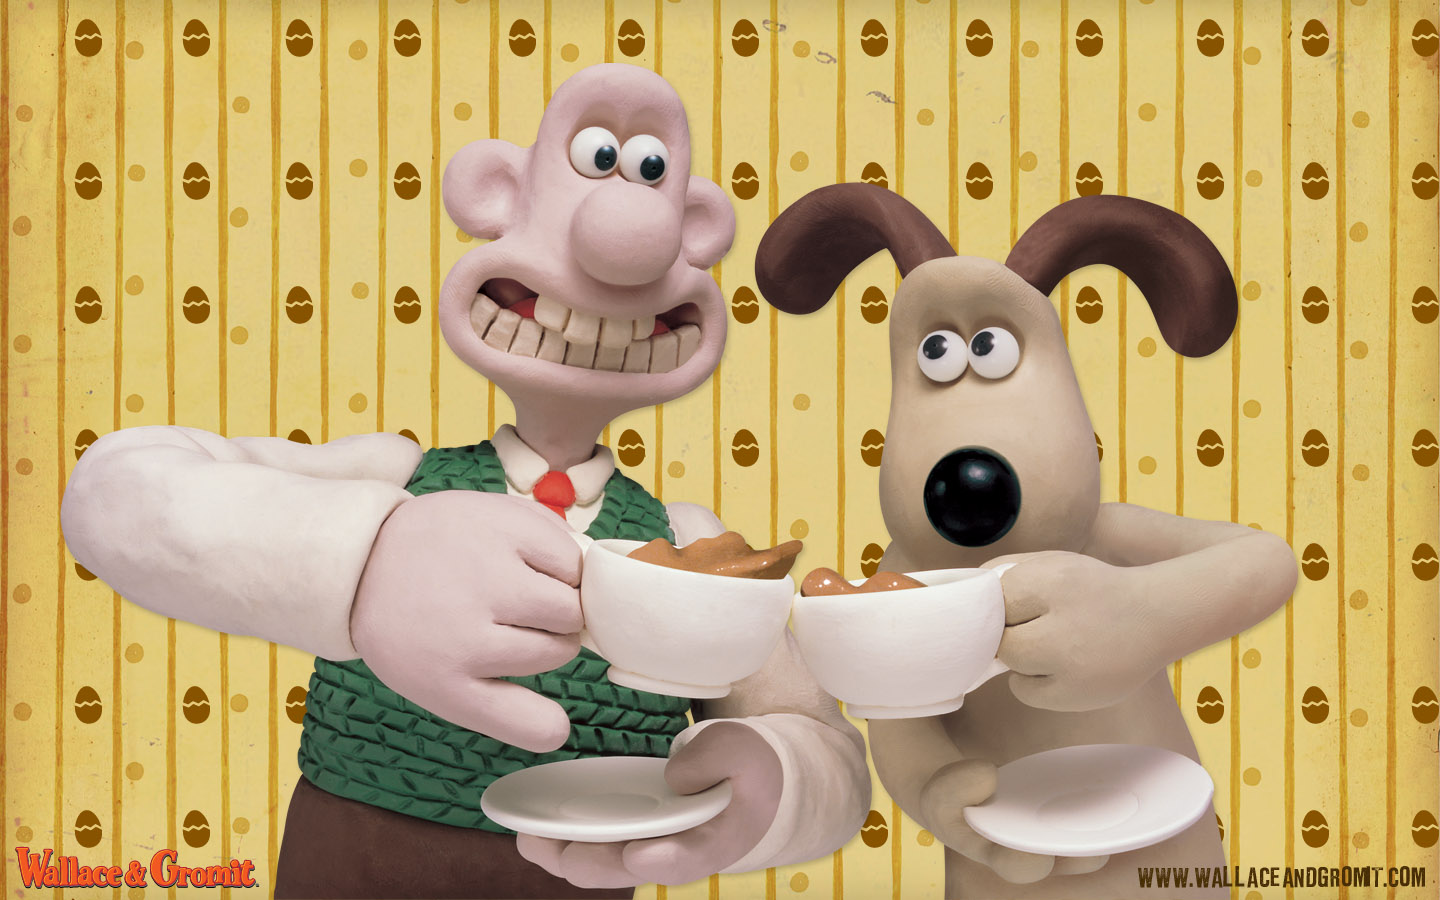  download wallace and gromit geekery Pinterest [1440x900] for 1440x900